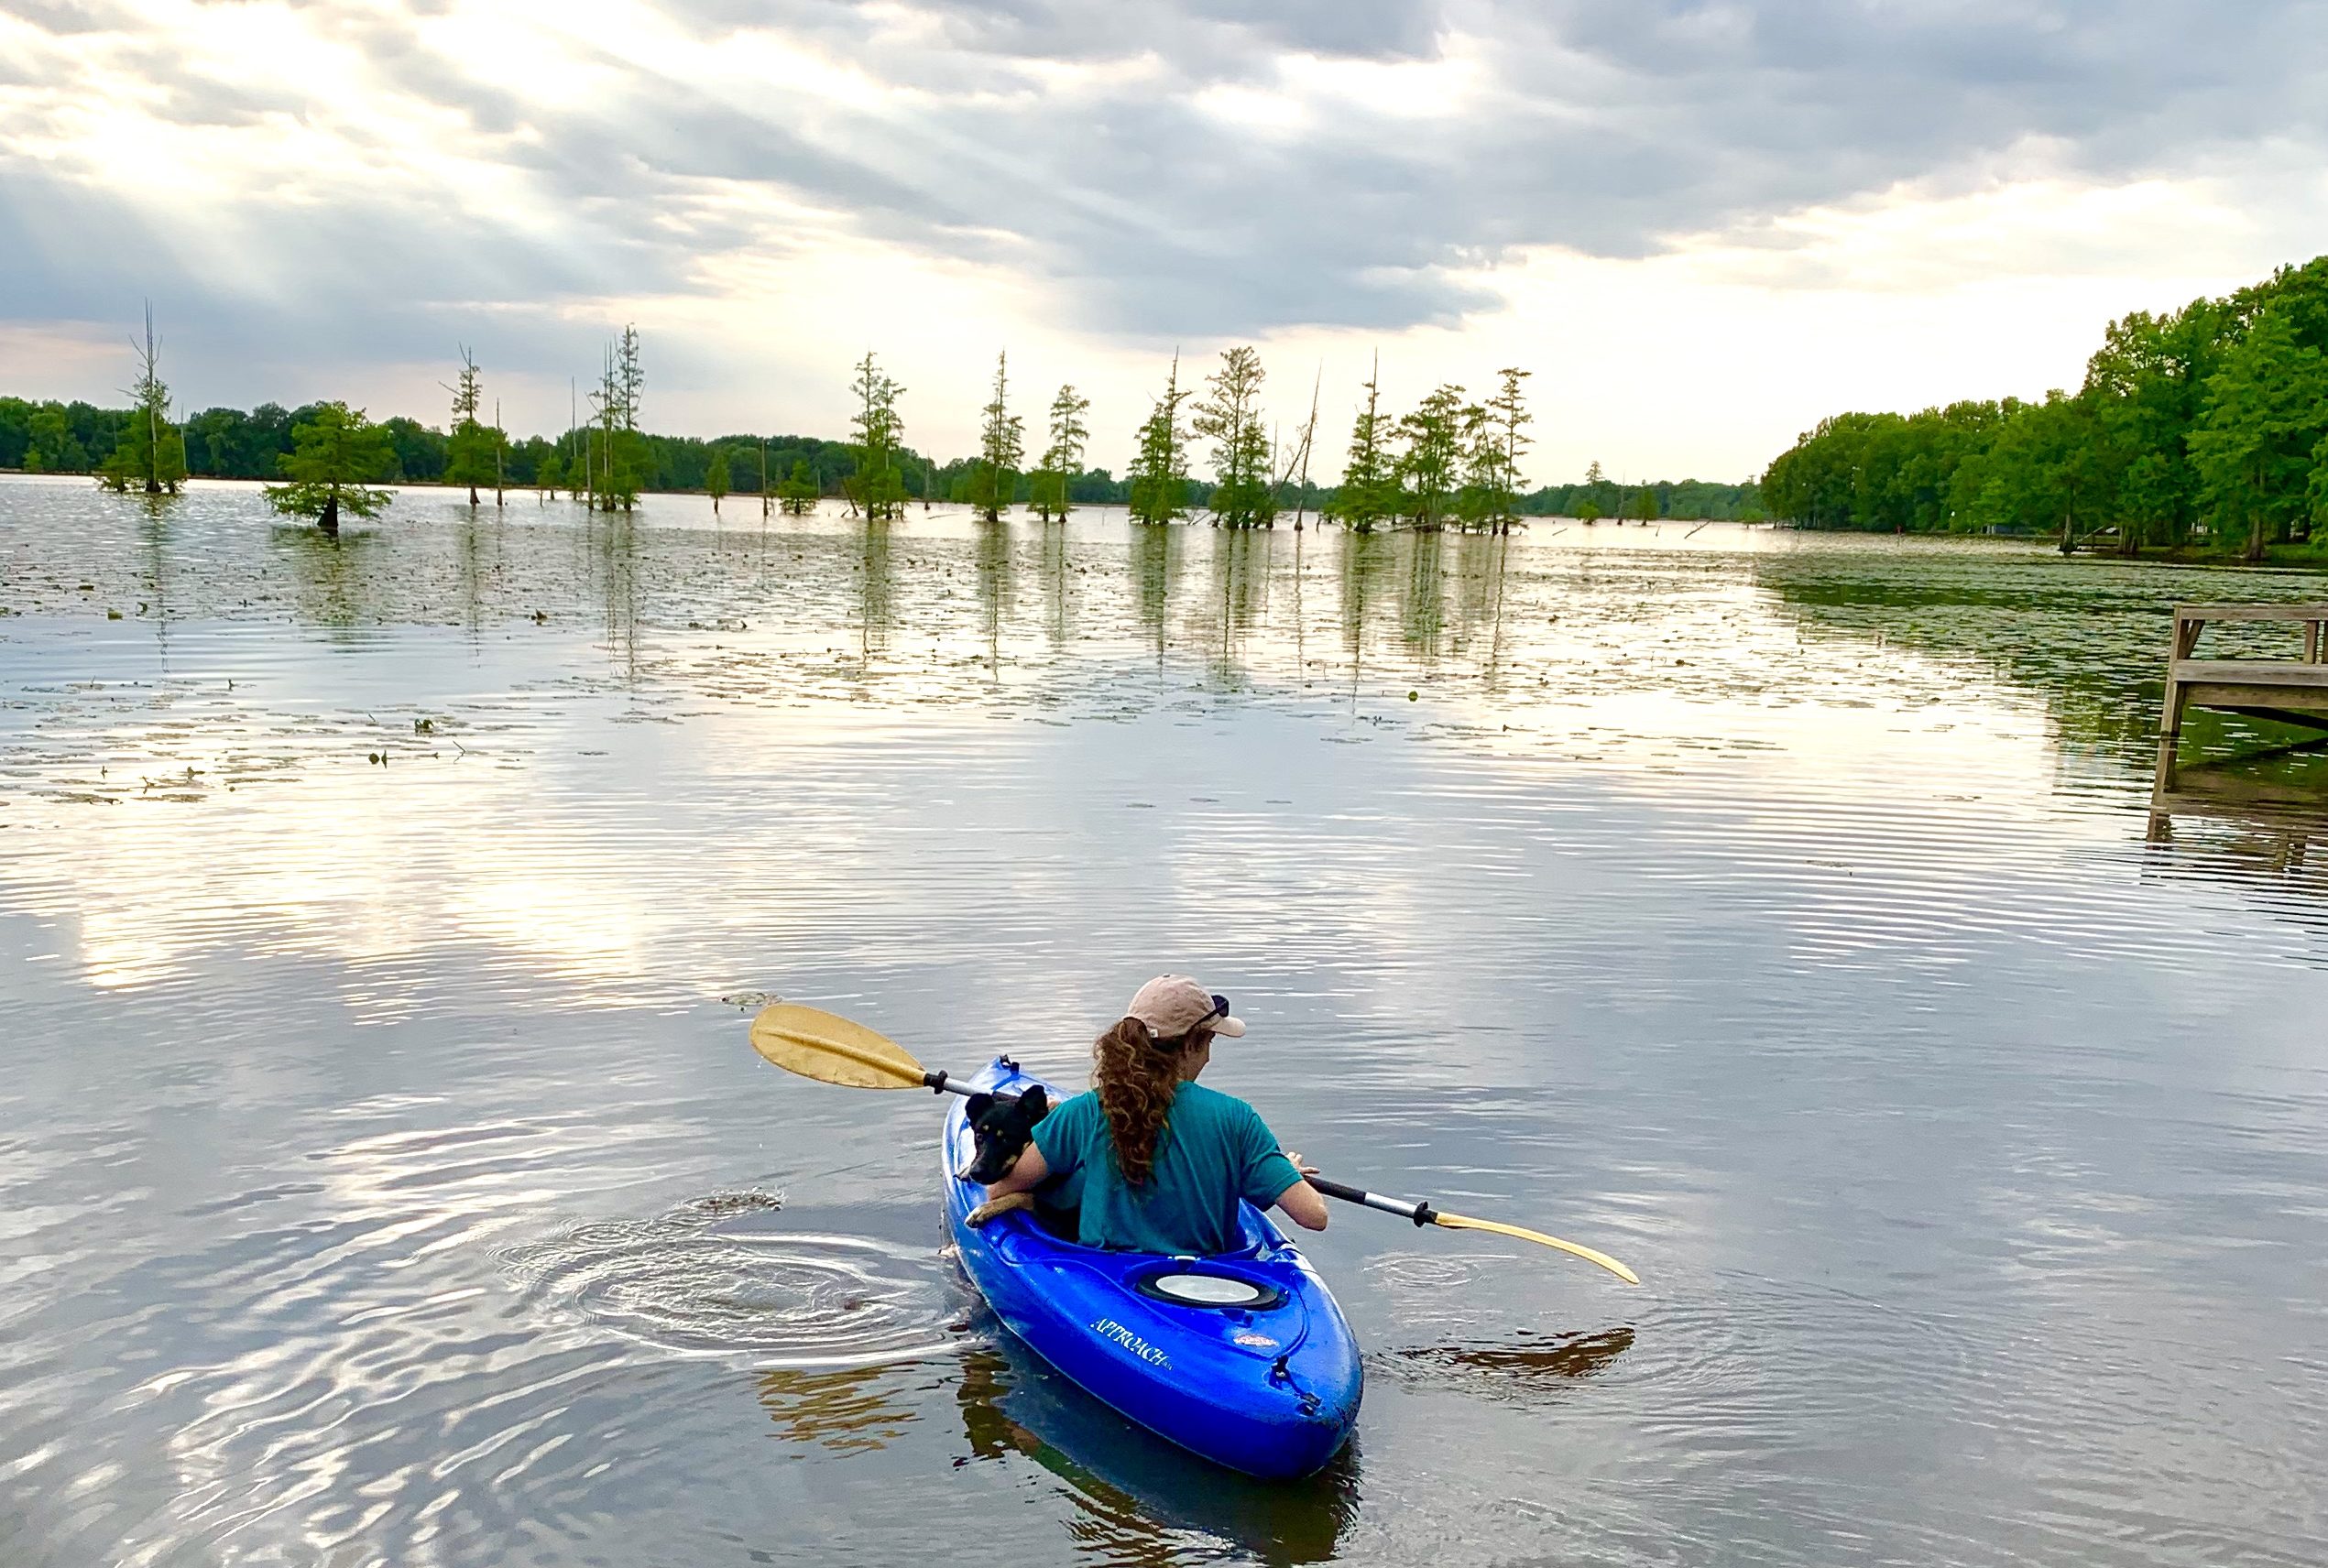 Pet-friendly adventure: kayaking with dog.